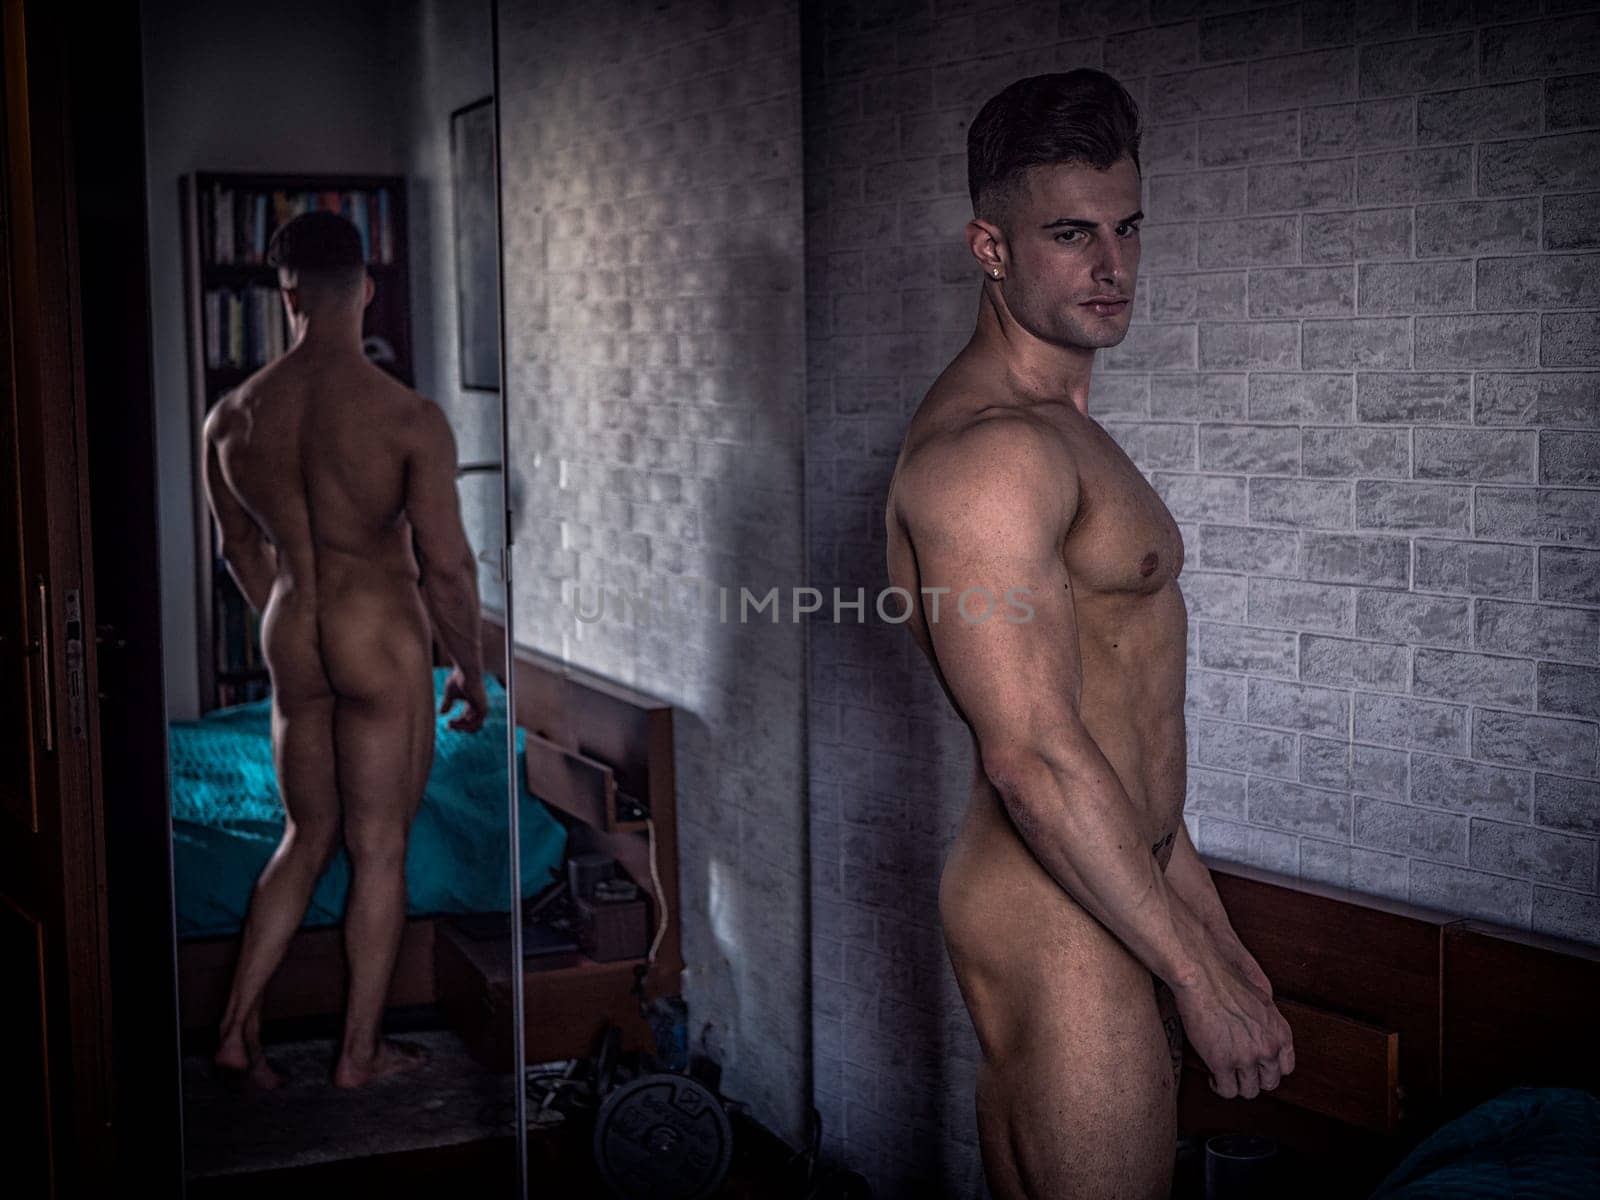 Photo of a male figure contemplating his reflection in a mirror by artofphoto